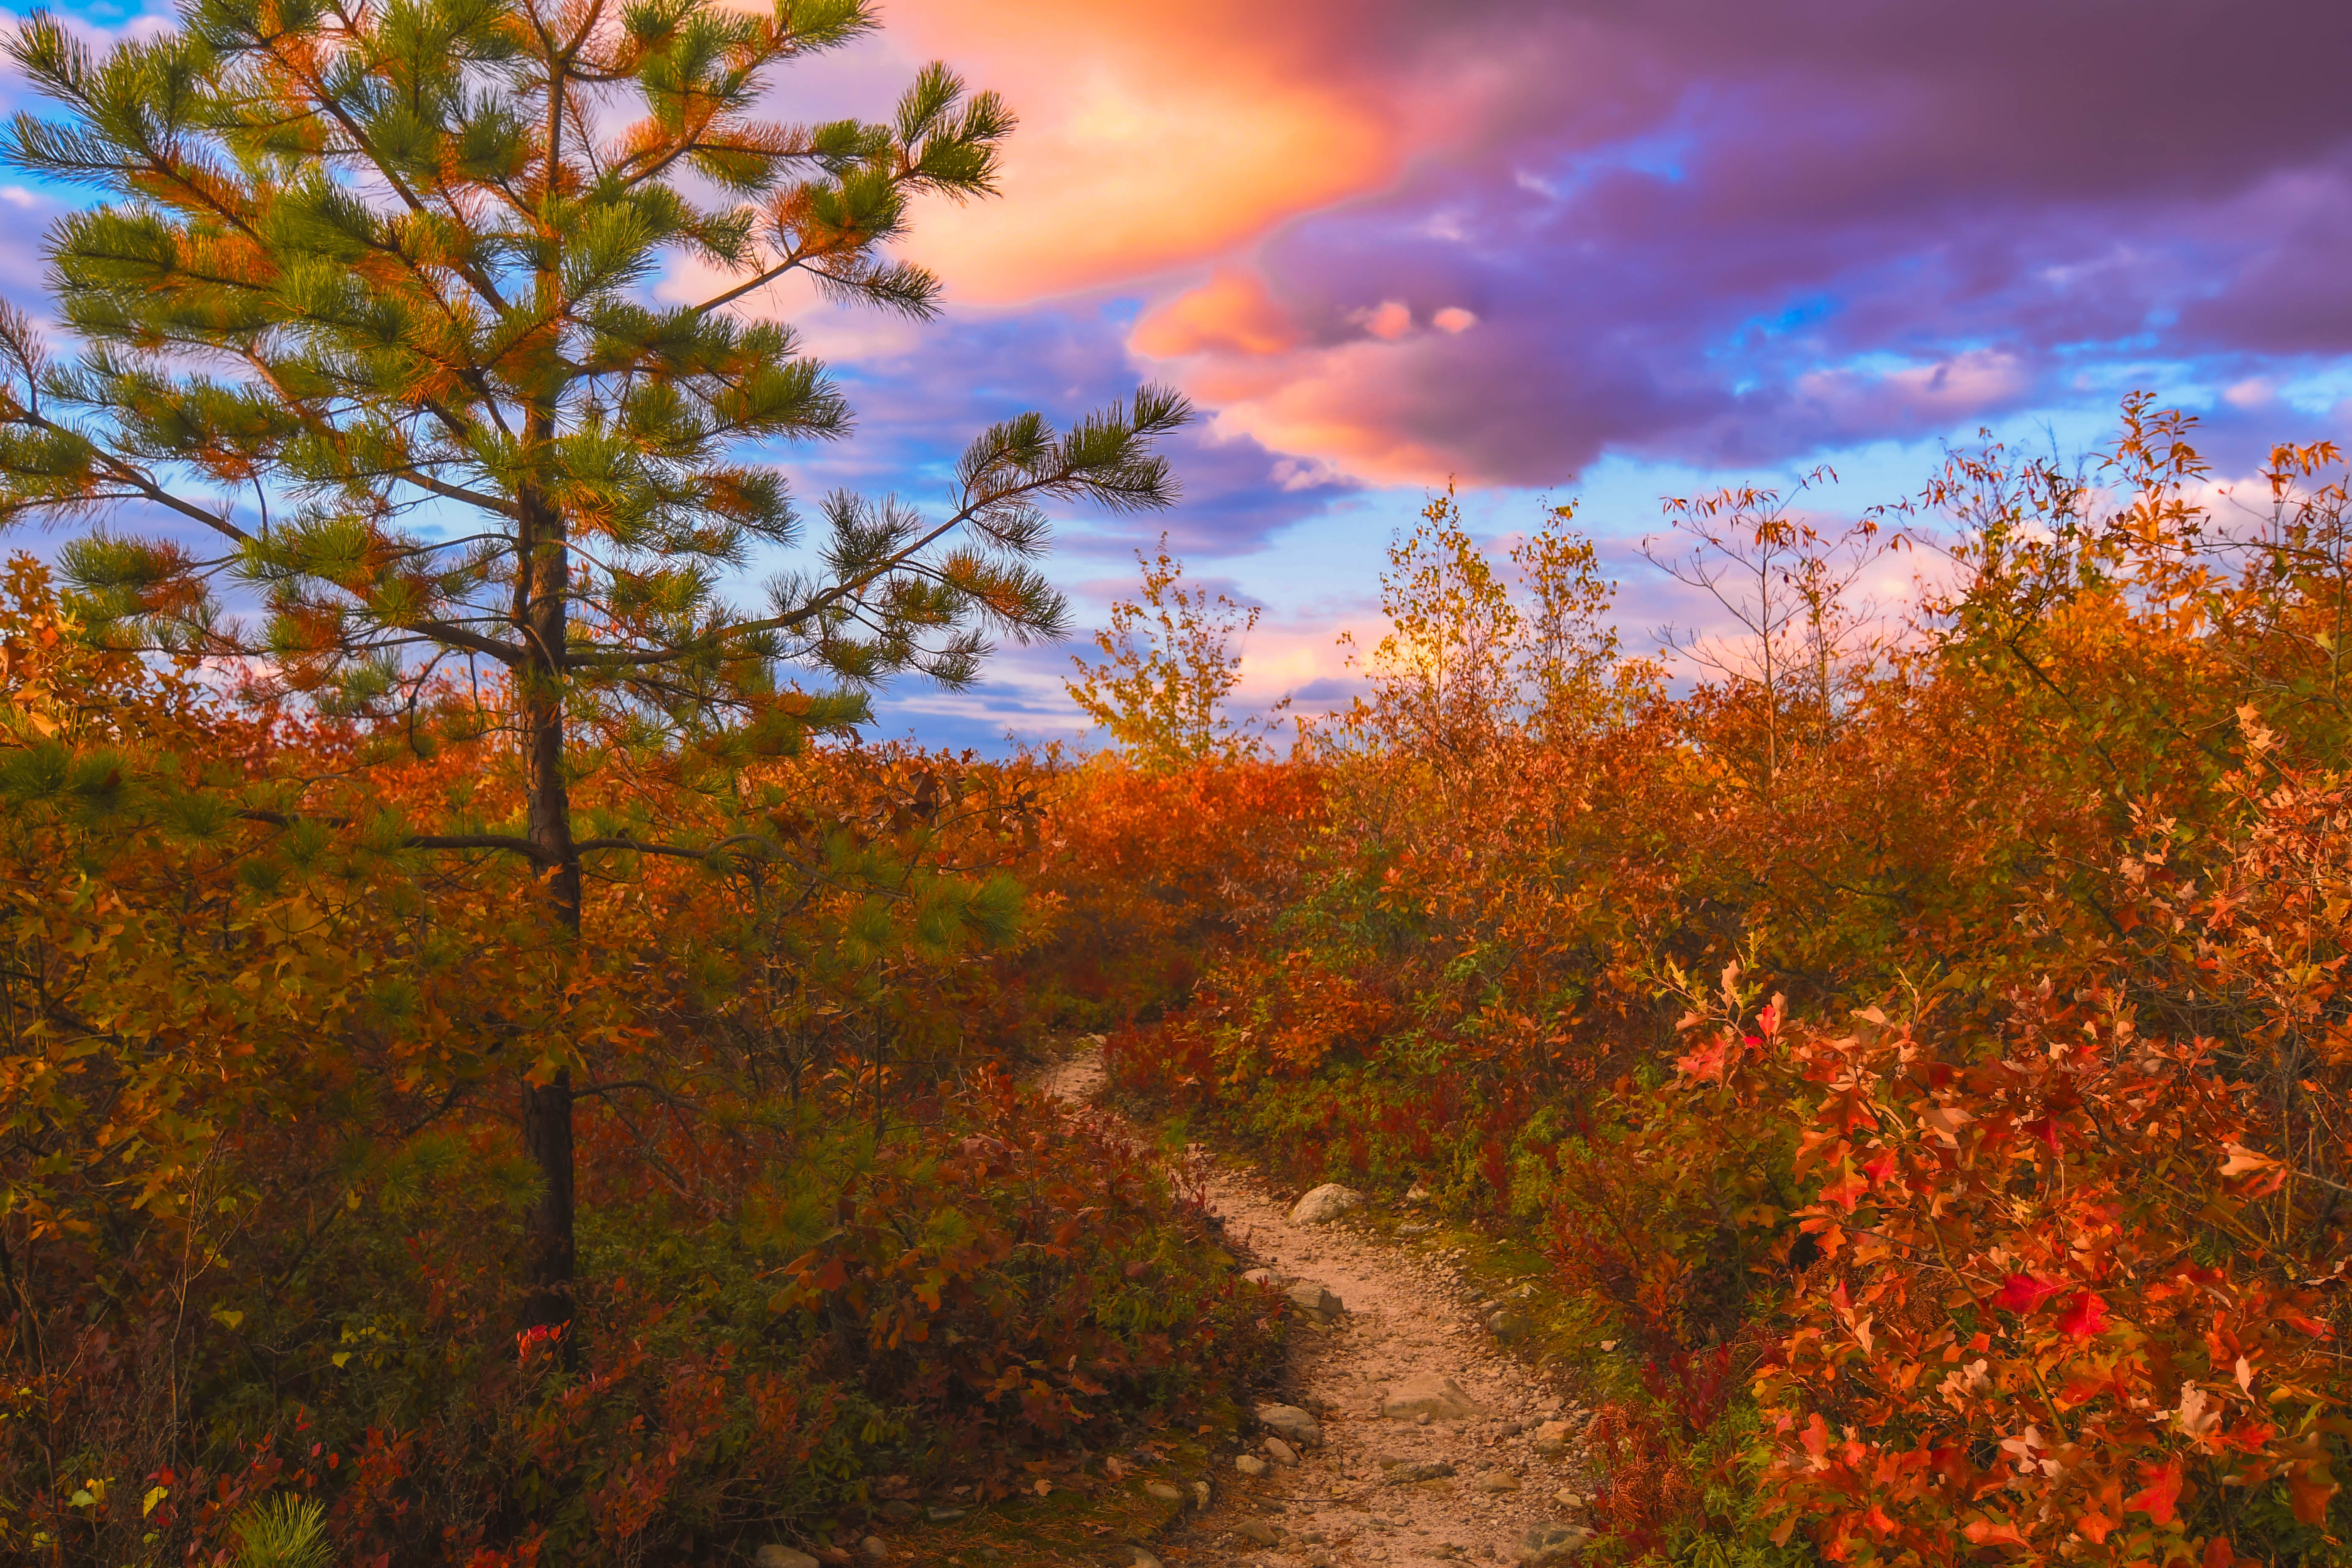 A cleared path runs through a tall brush. A tree sits to the left of the path agasint a pink and purple clouded sky.